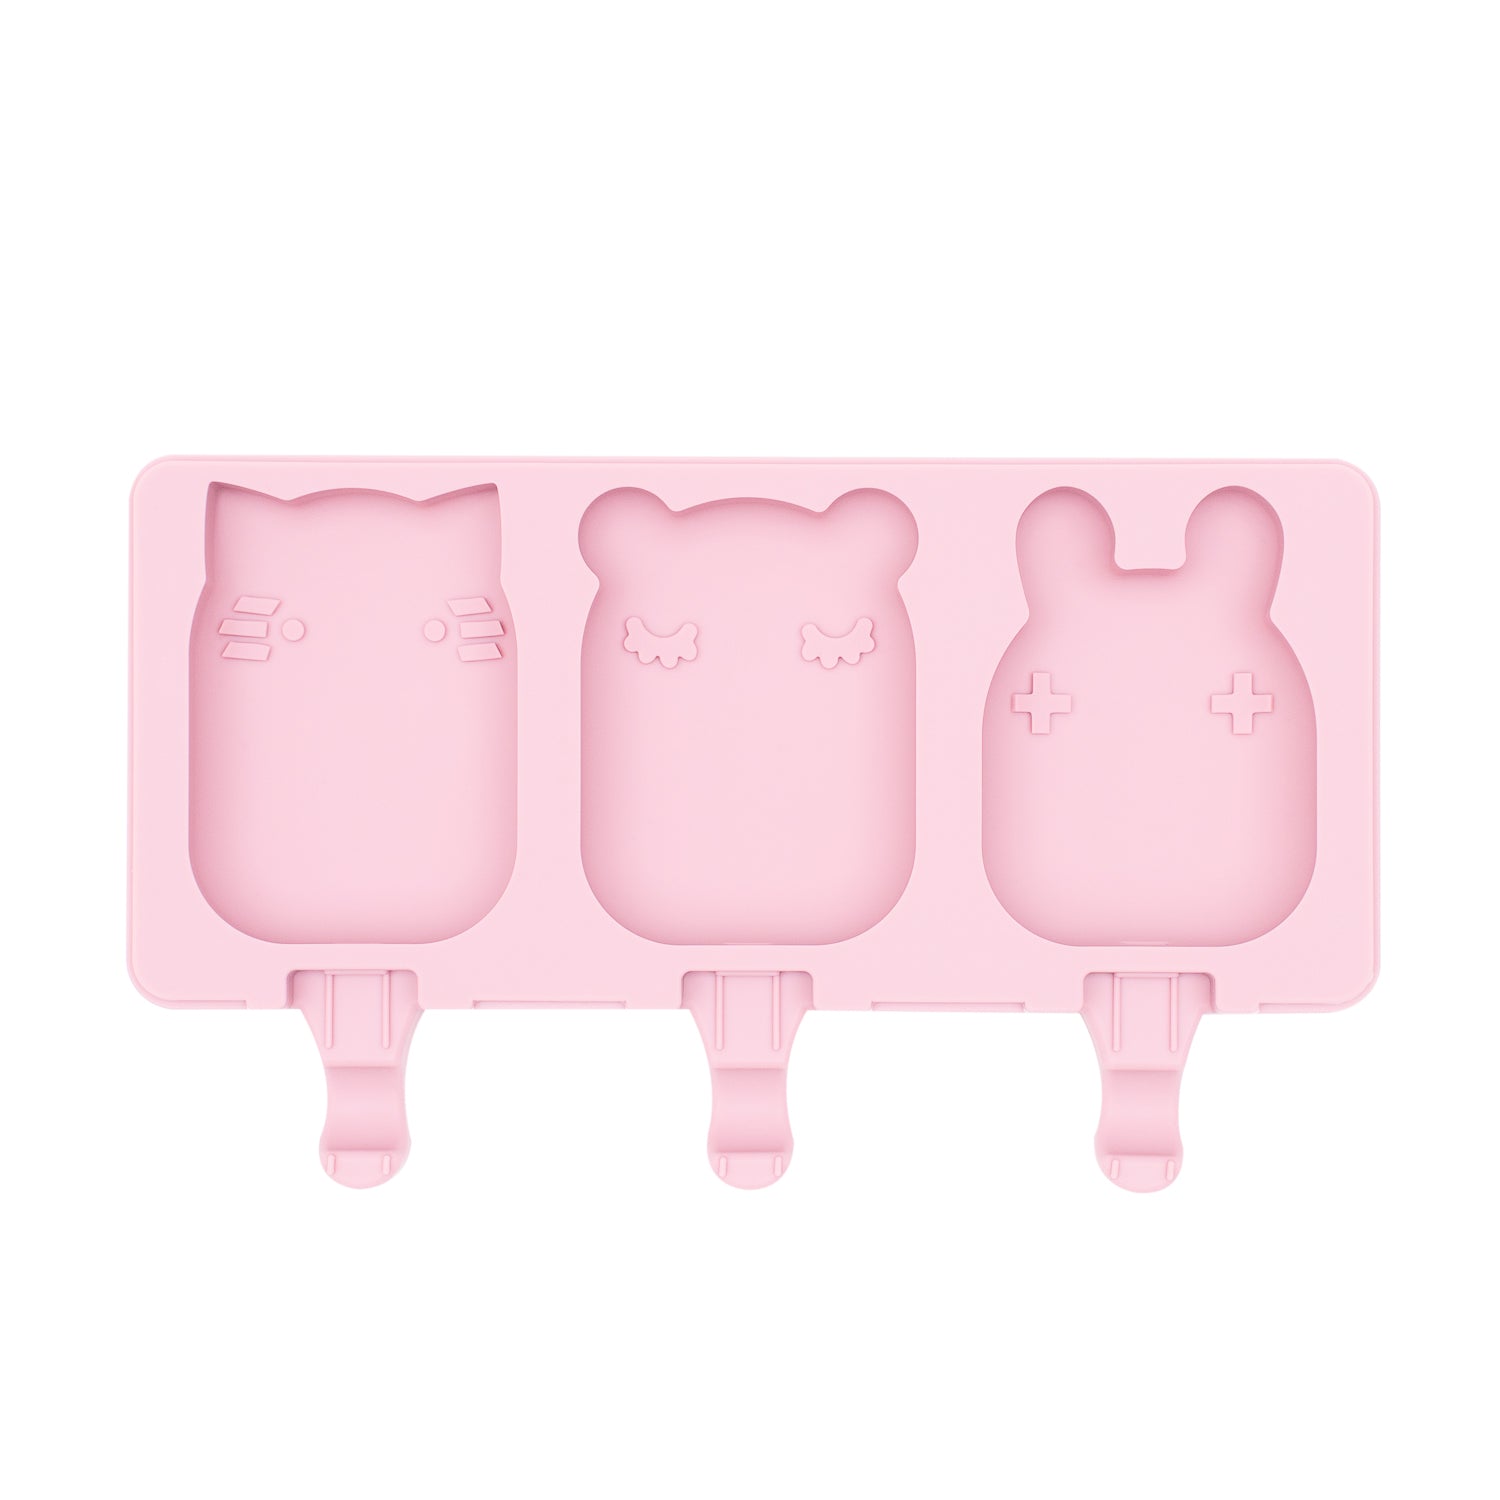 Frosties Icy pole Mould - Powder Pink